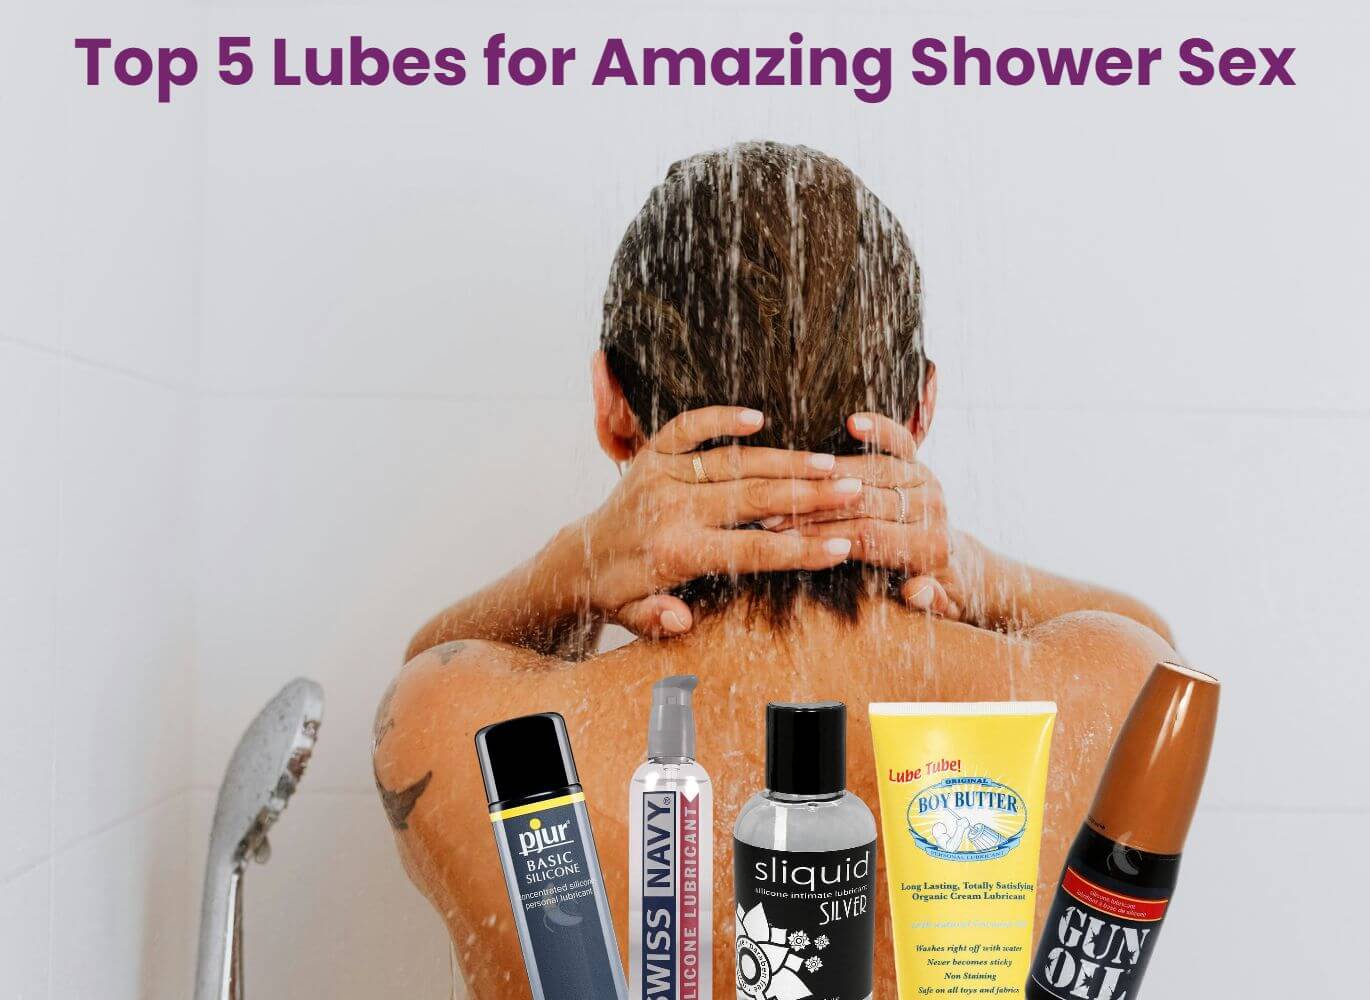 Top 5 Lubes for Amazing Shower Sex